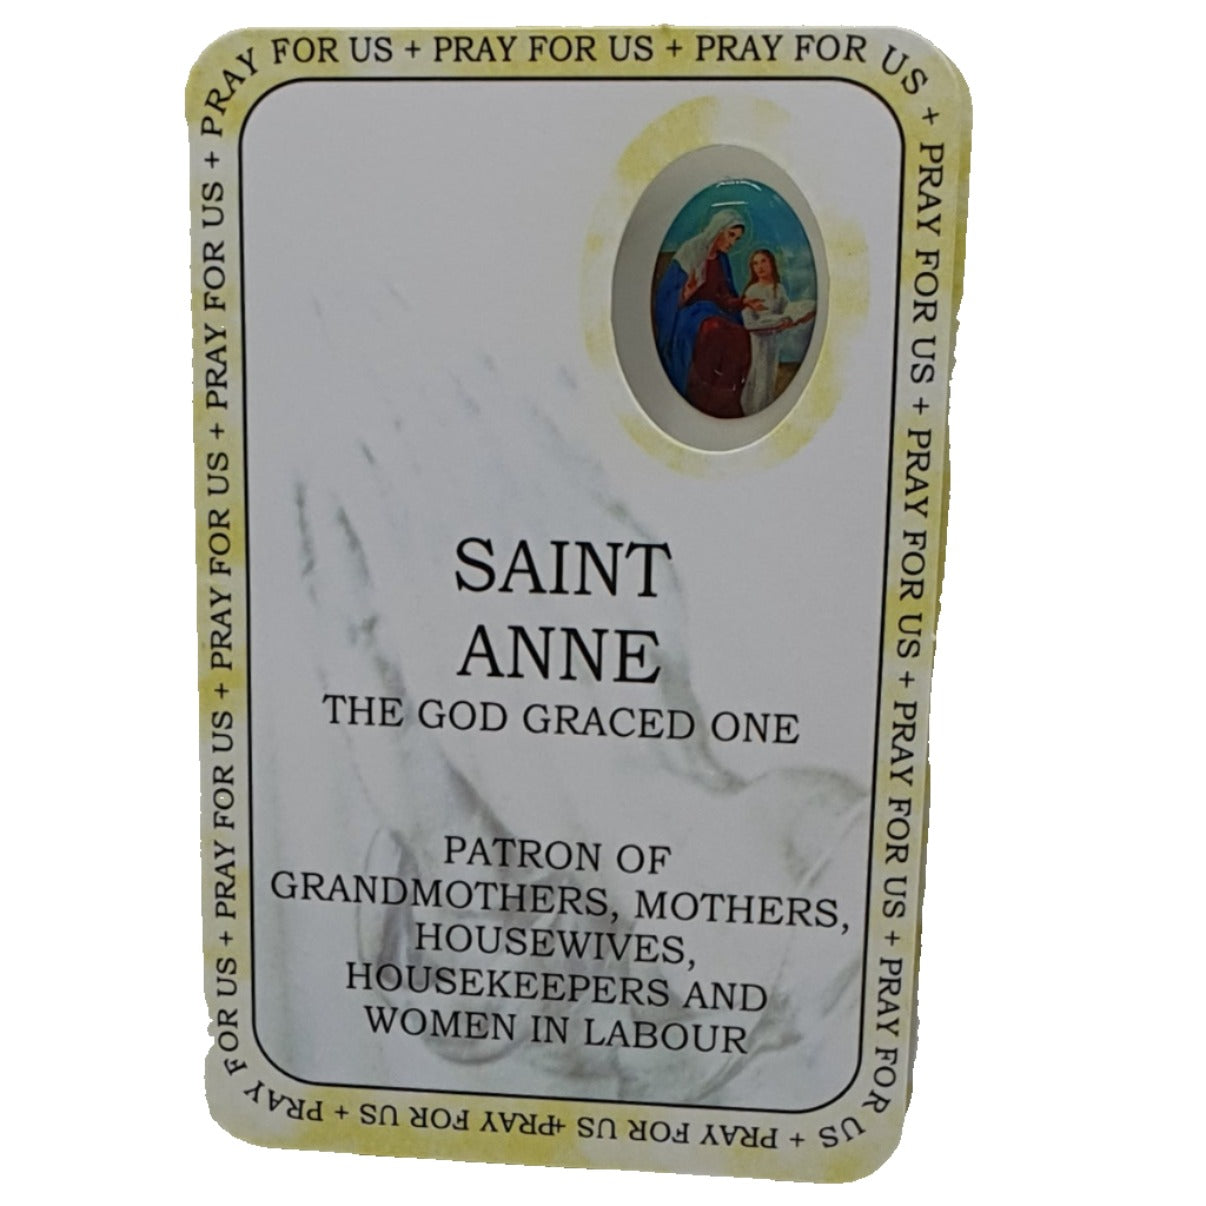 St Anne Prayer Card - Patron of Grandmothers, Mothers, Housewives and Women in Labour